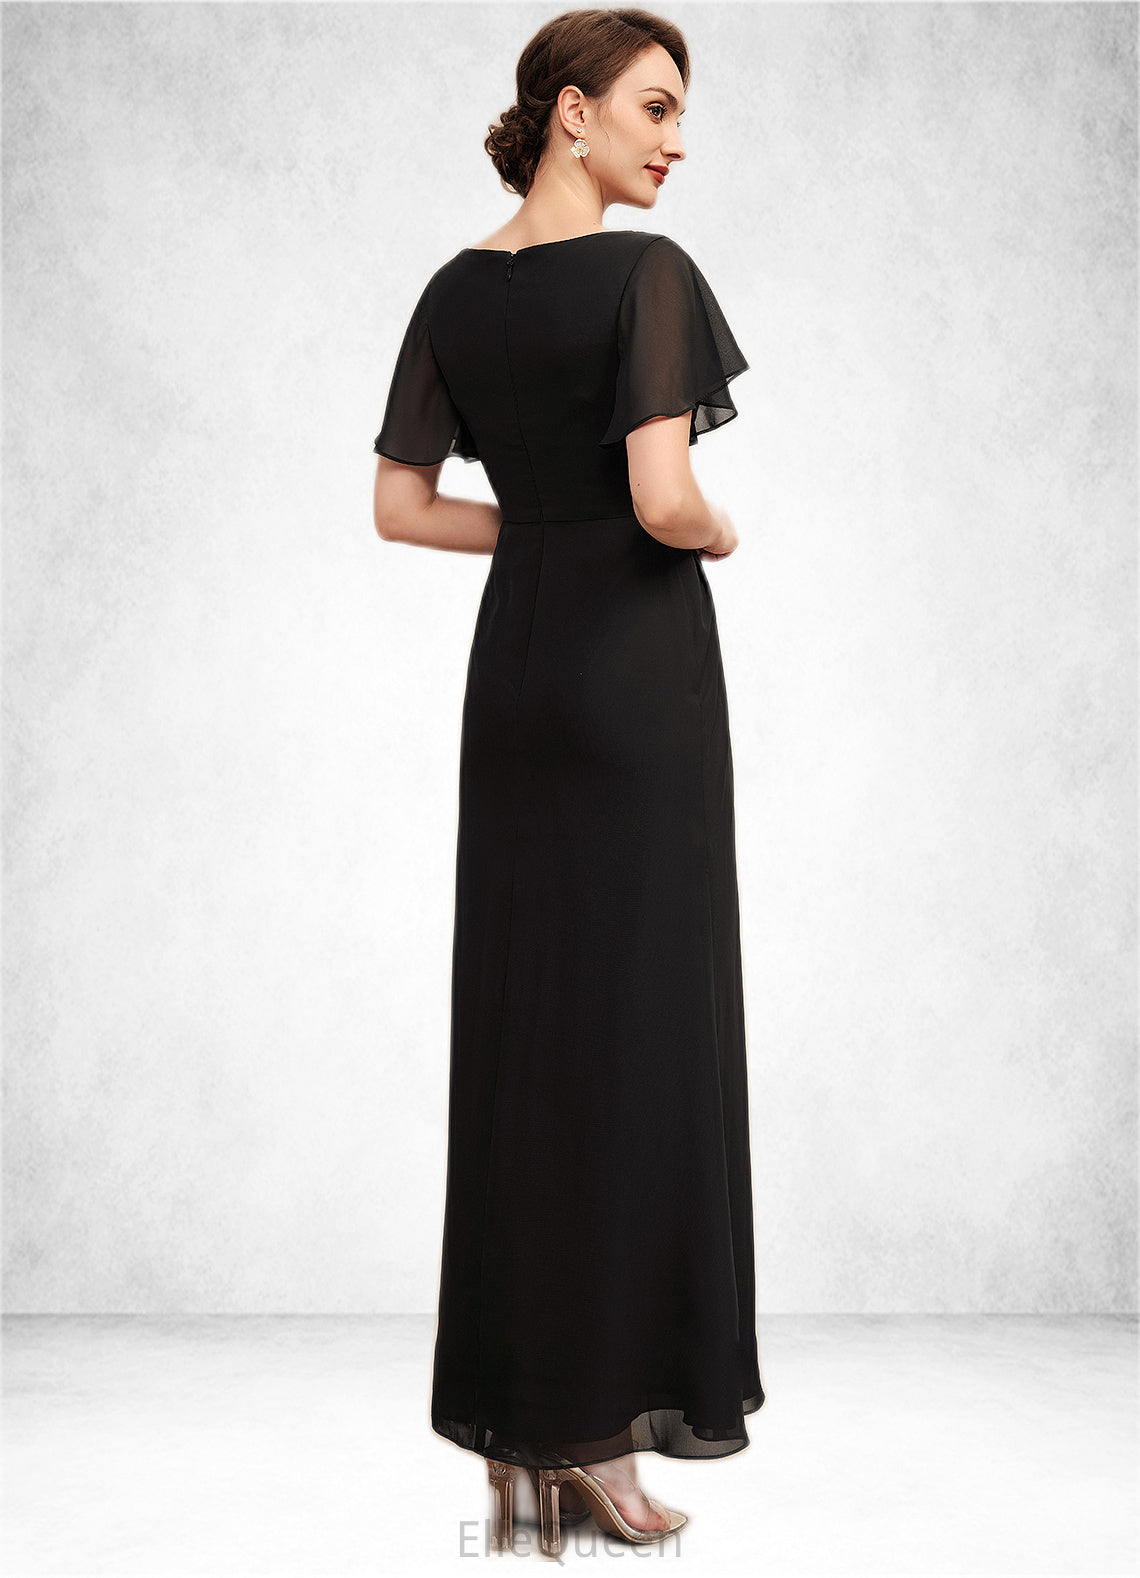 Bella A-Line Scoop Neck Ankle-Length Chiffon Mother of the Bride Dress With Ruffle Beading DG126P0014533